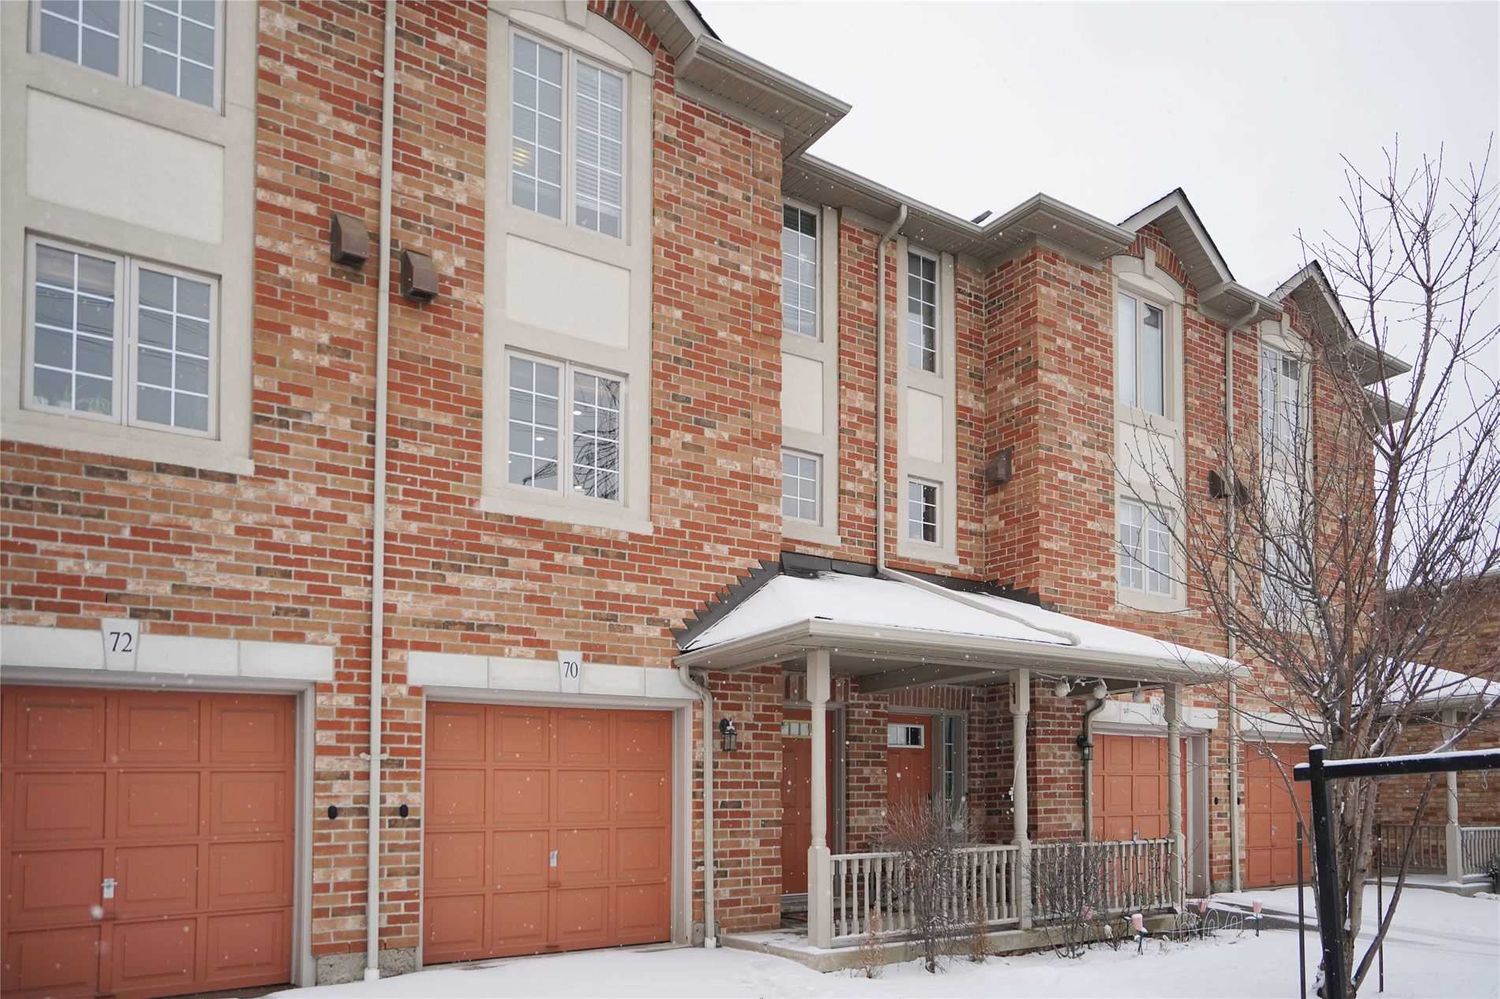 7385 Magistrate Terrace. 7385 Magistrate Terrace Townhomes is located in  Mississauga, Toronto - image #2 of 2